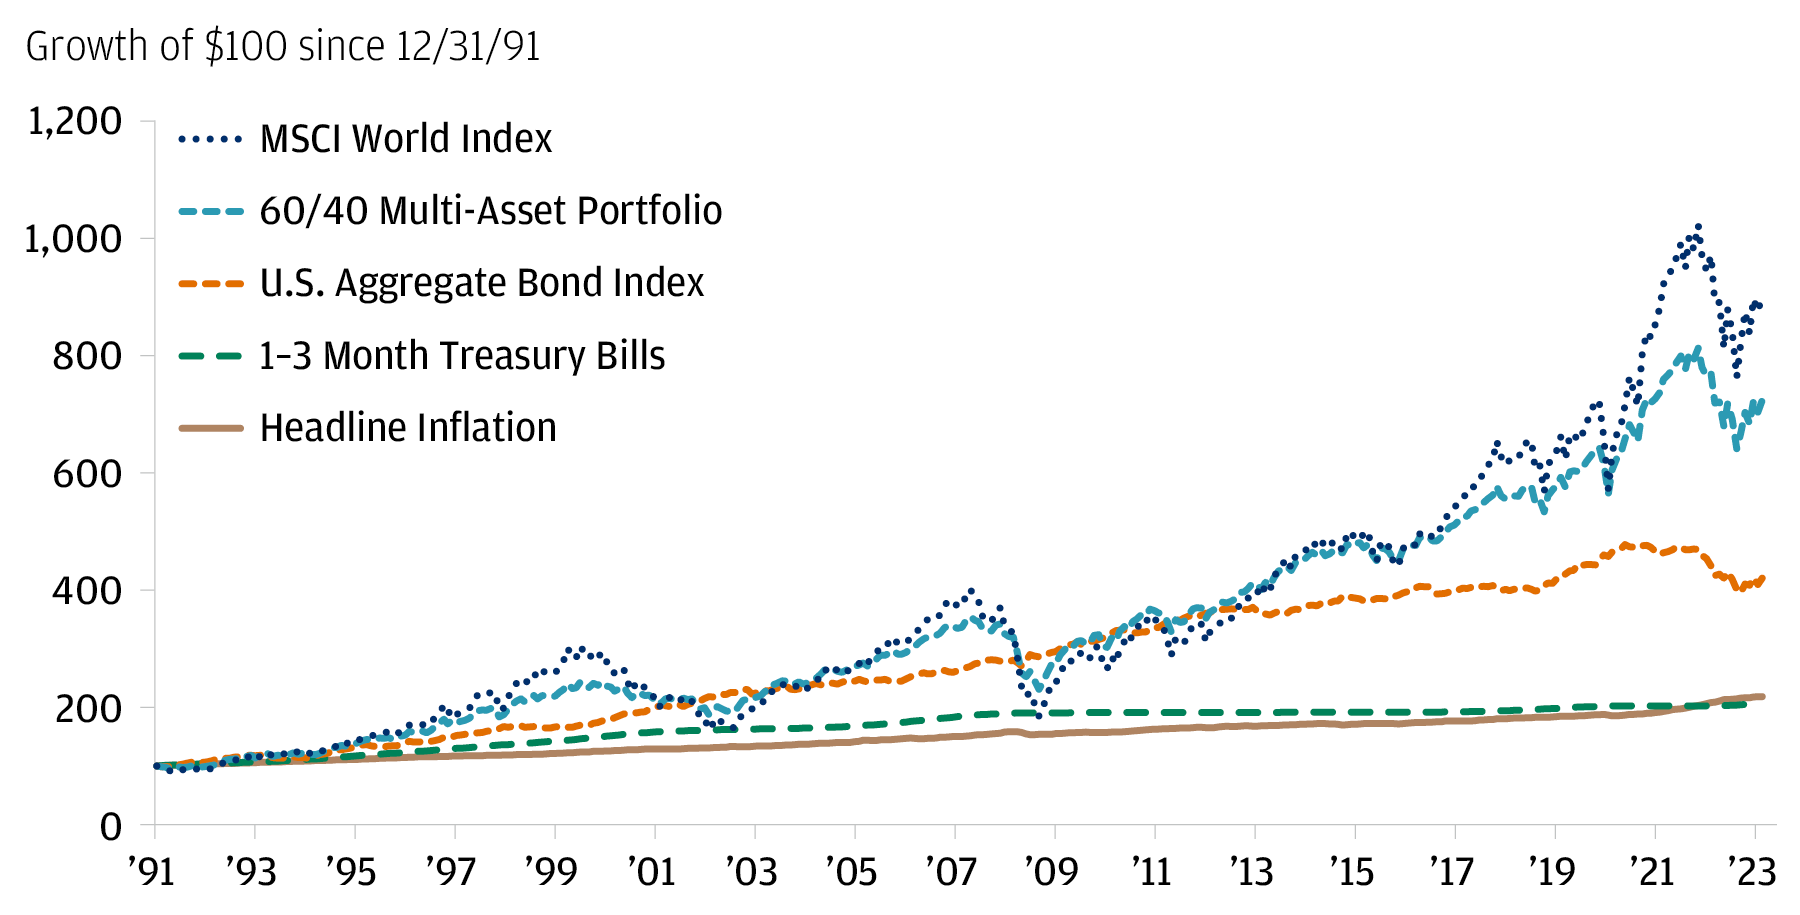 Equities have served as the growth engine in portfolios to beat inflation over time